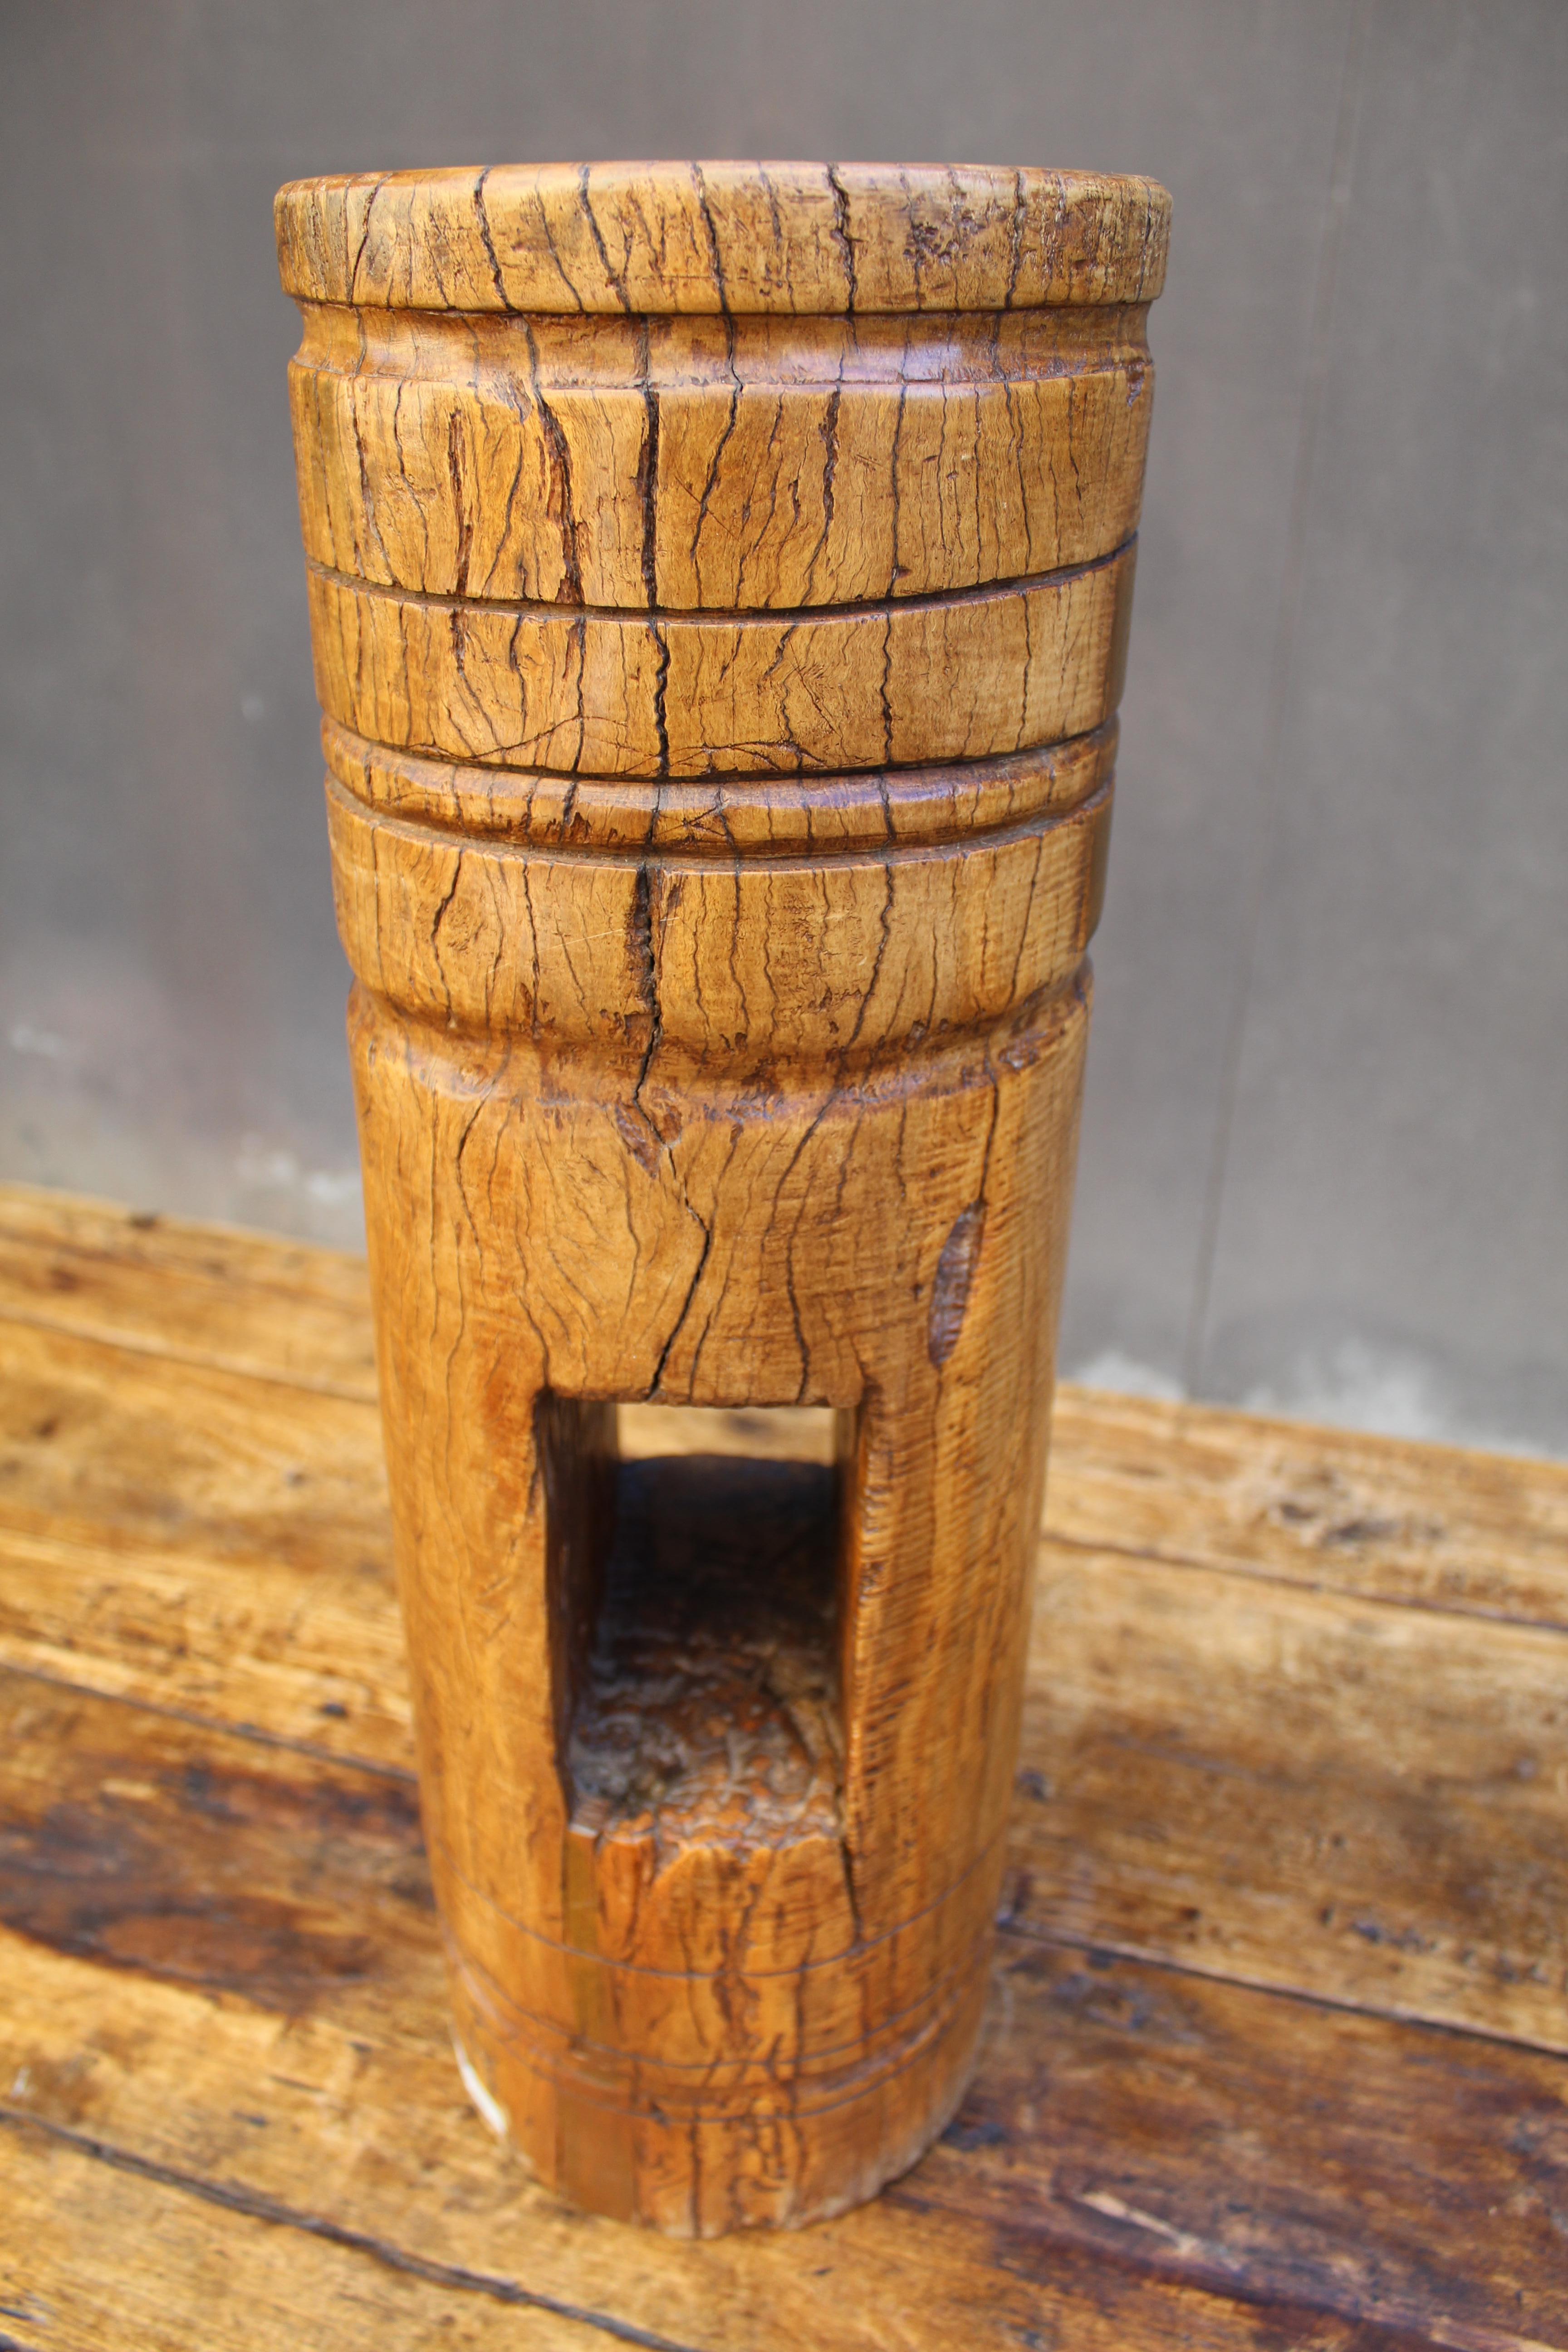 Asian wood house piling. Hand hewed pole, you can see the mortise joint indicative of Asian traditional architectural craftsmanship for timber-framed structures embodies a heritage of wisdom and craftsmanship. Found Object or drink stand.